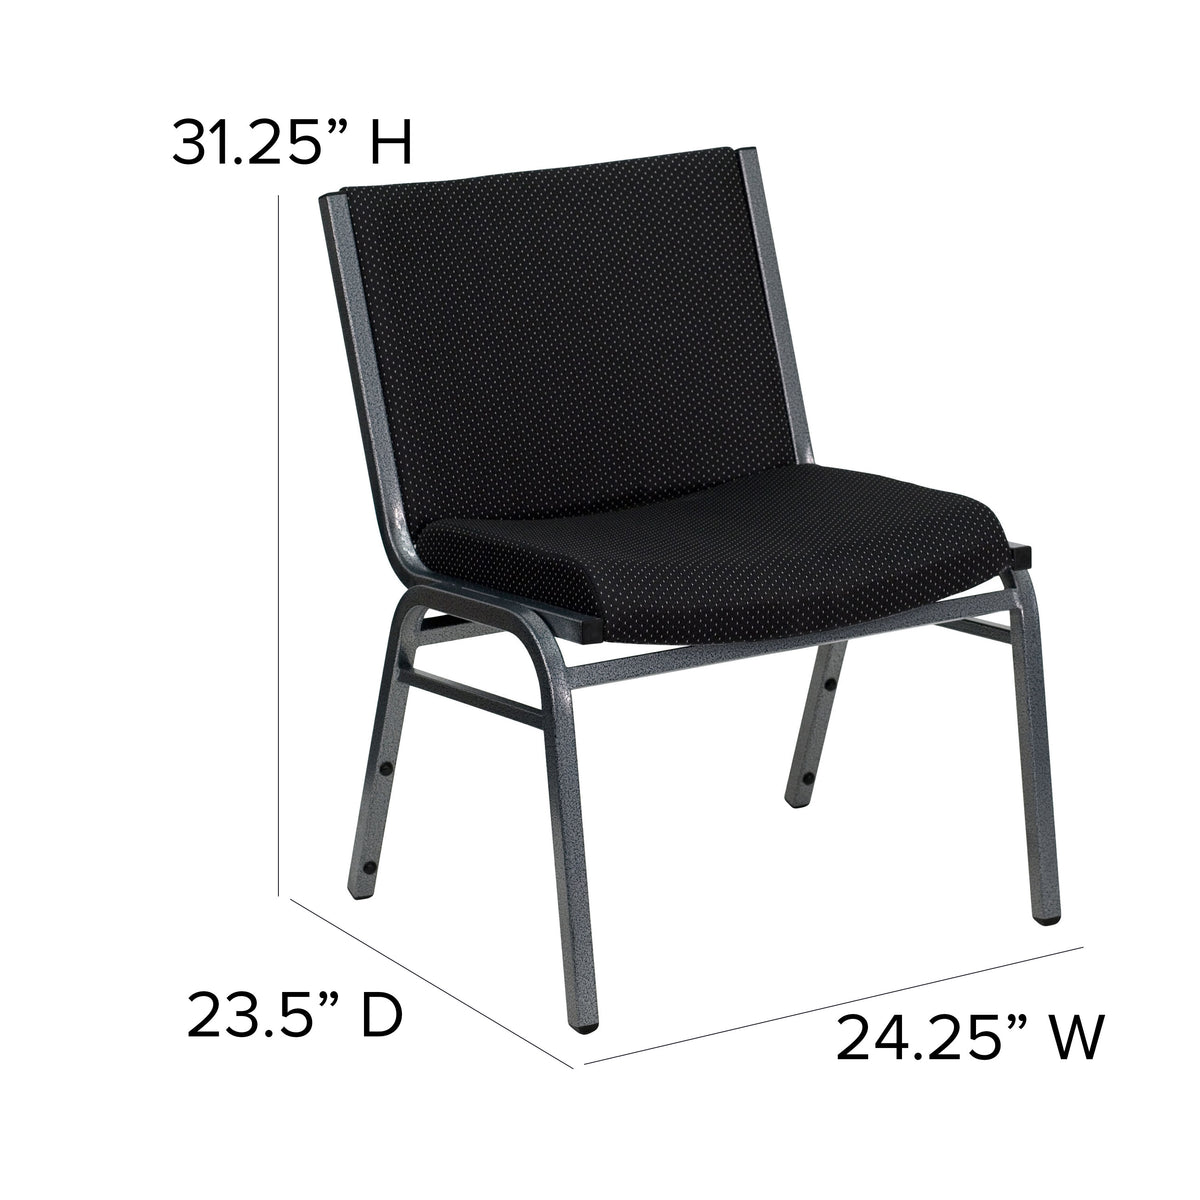 Black |#| Big & Tall 1000 lb. Rated Black Fabric Stack Chair - Reception Seating